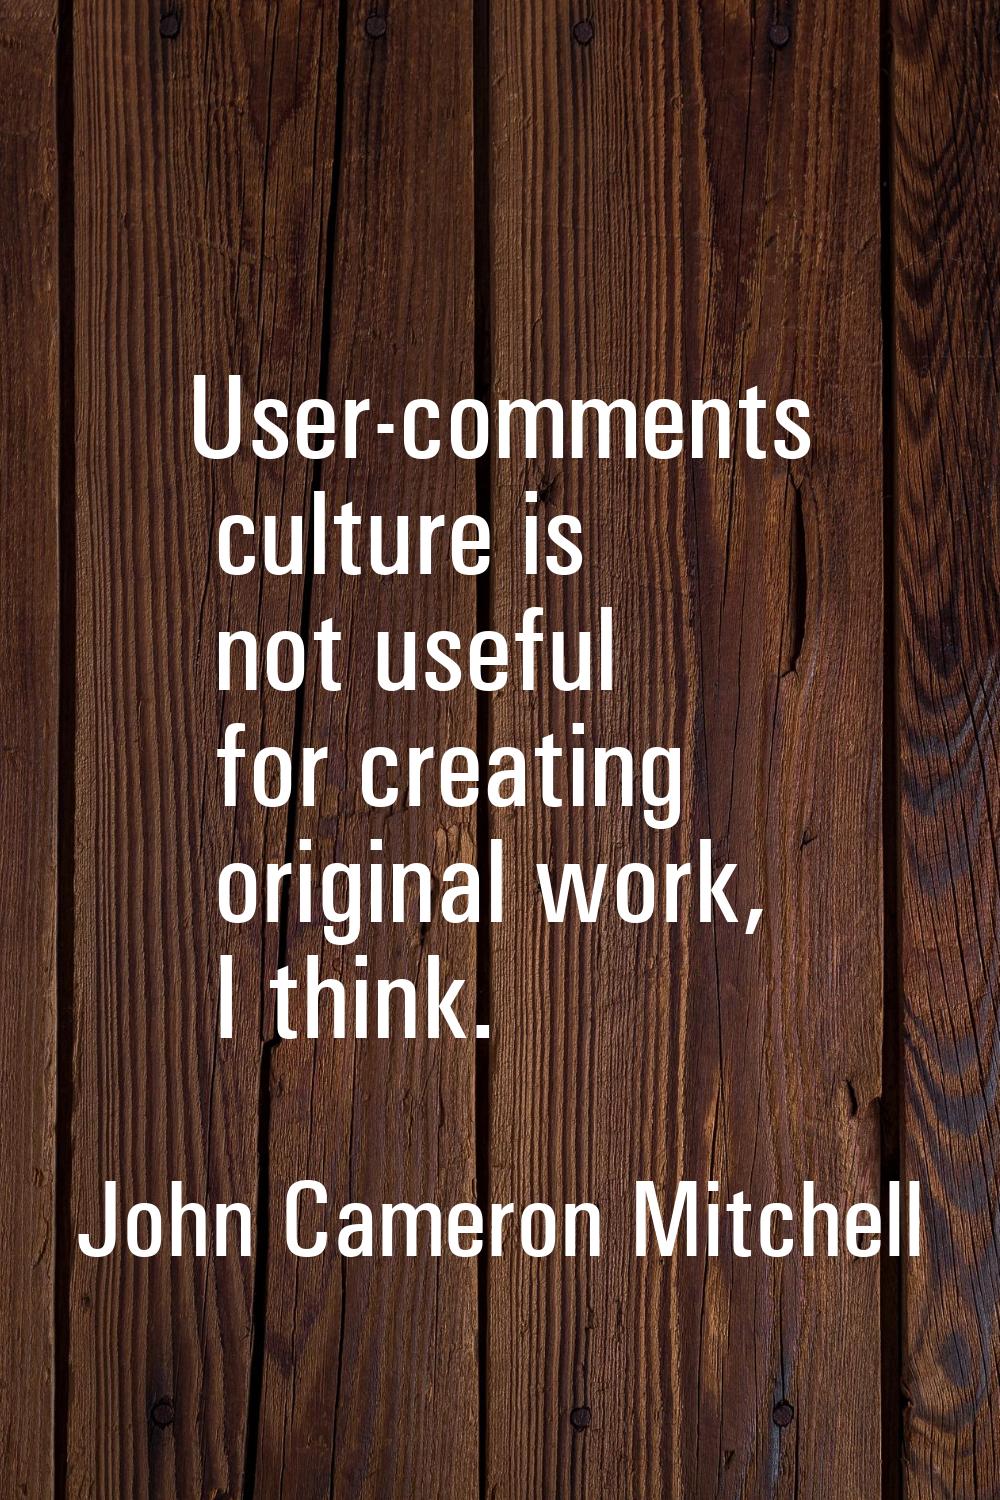 User-comments culture is not useful for creating original work, I think.